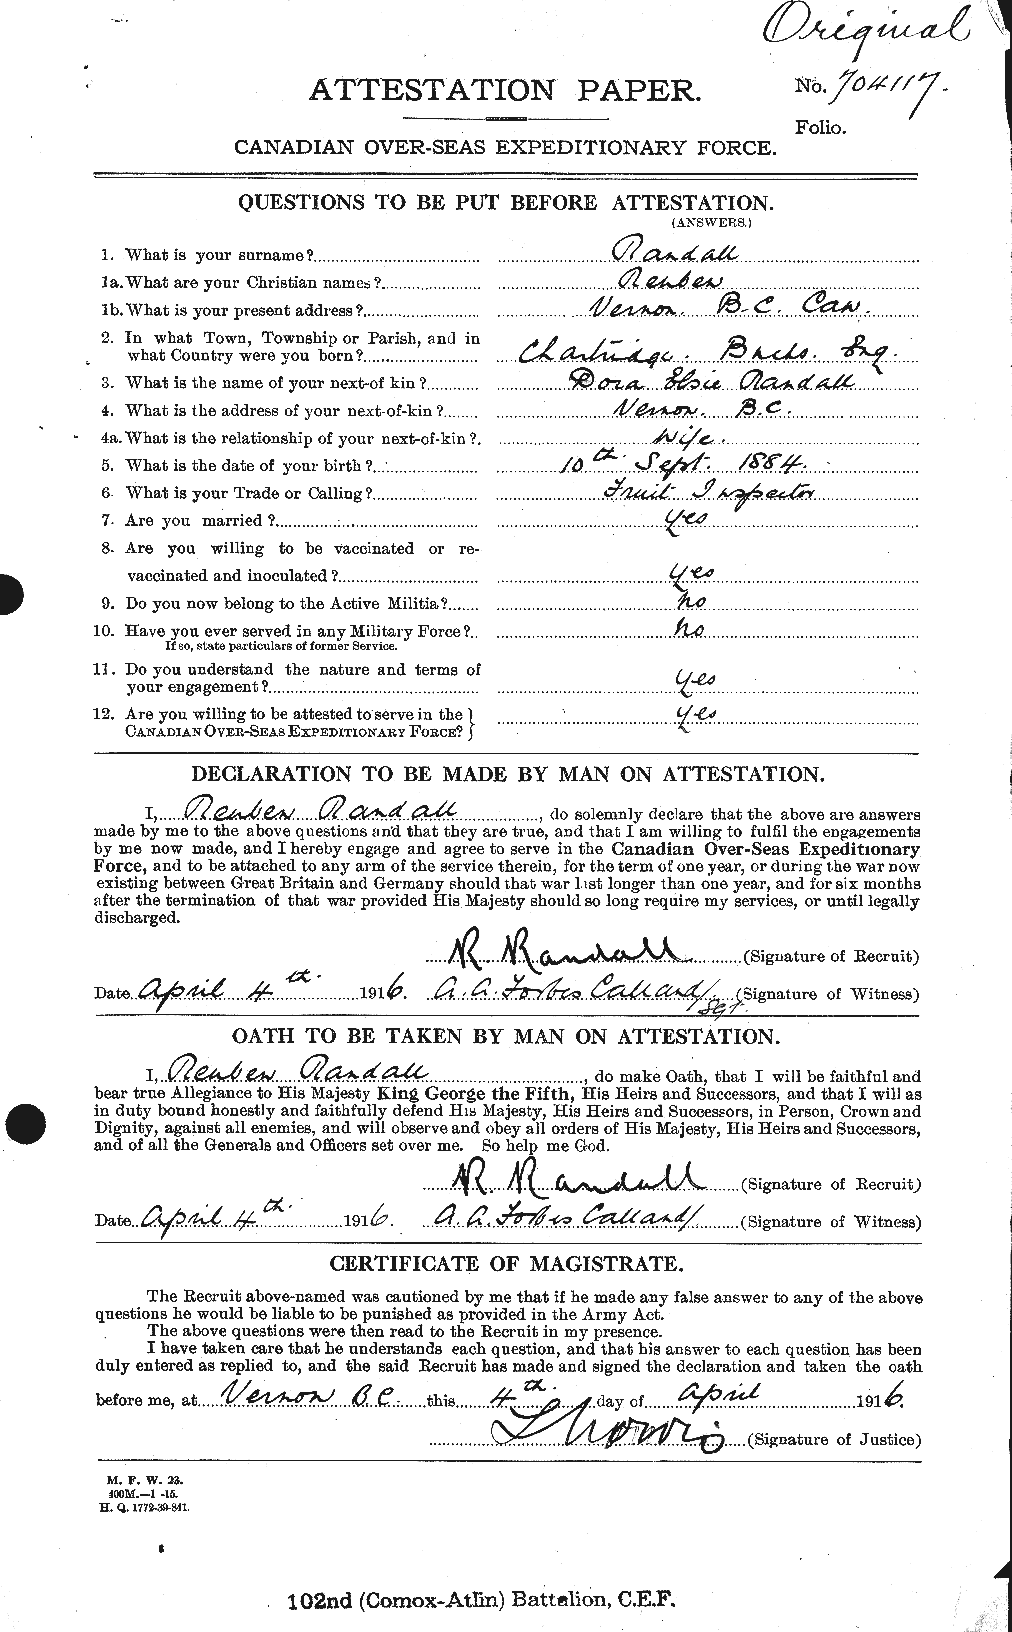 Personnel Records of the First World War - CEF 594102a